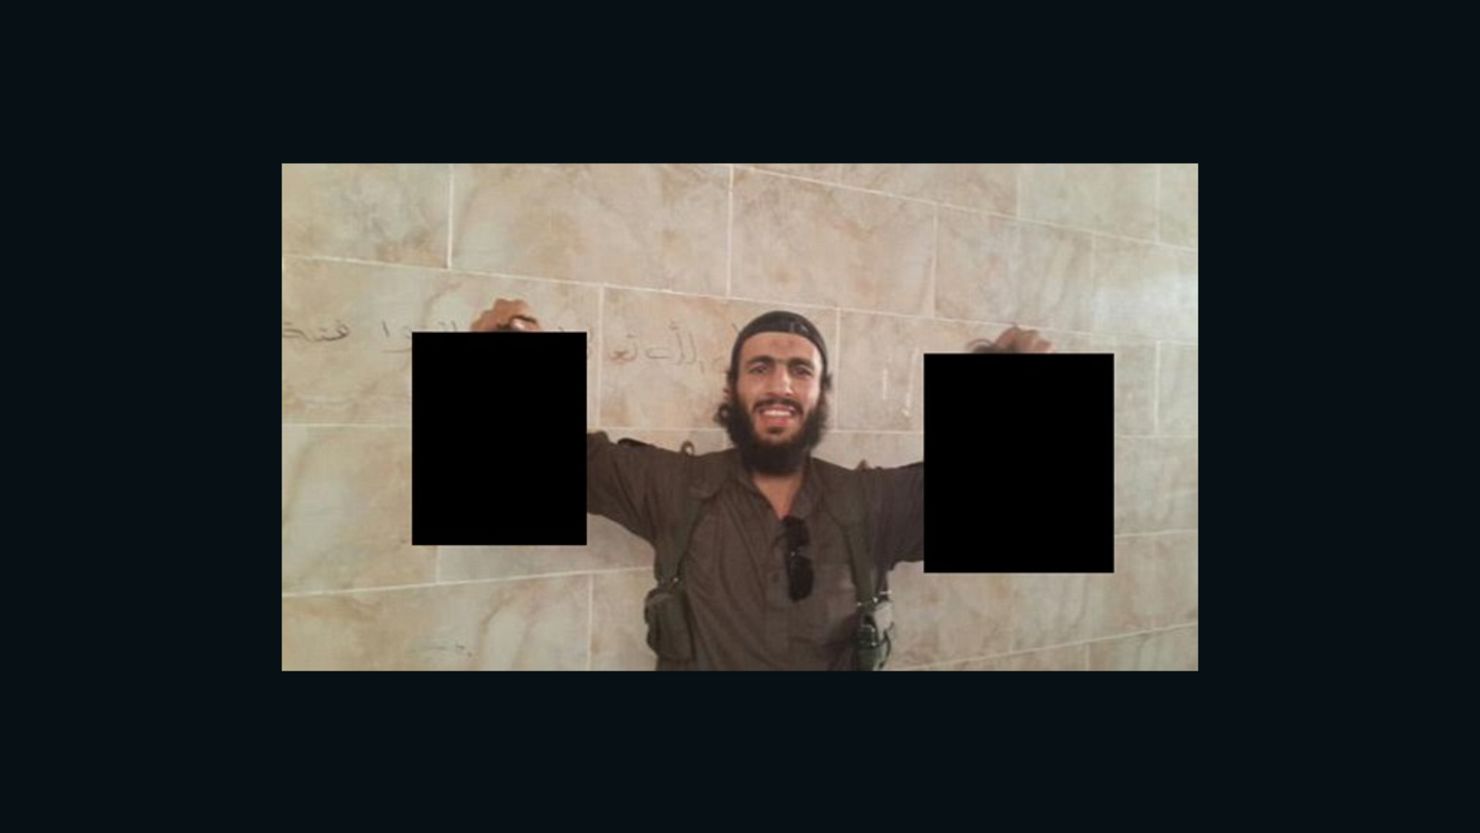 An image believed to be of Mohamed Elomar holding severed heads posted to Twitter.